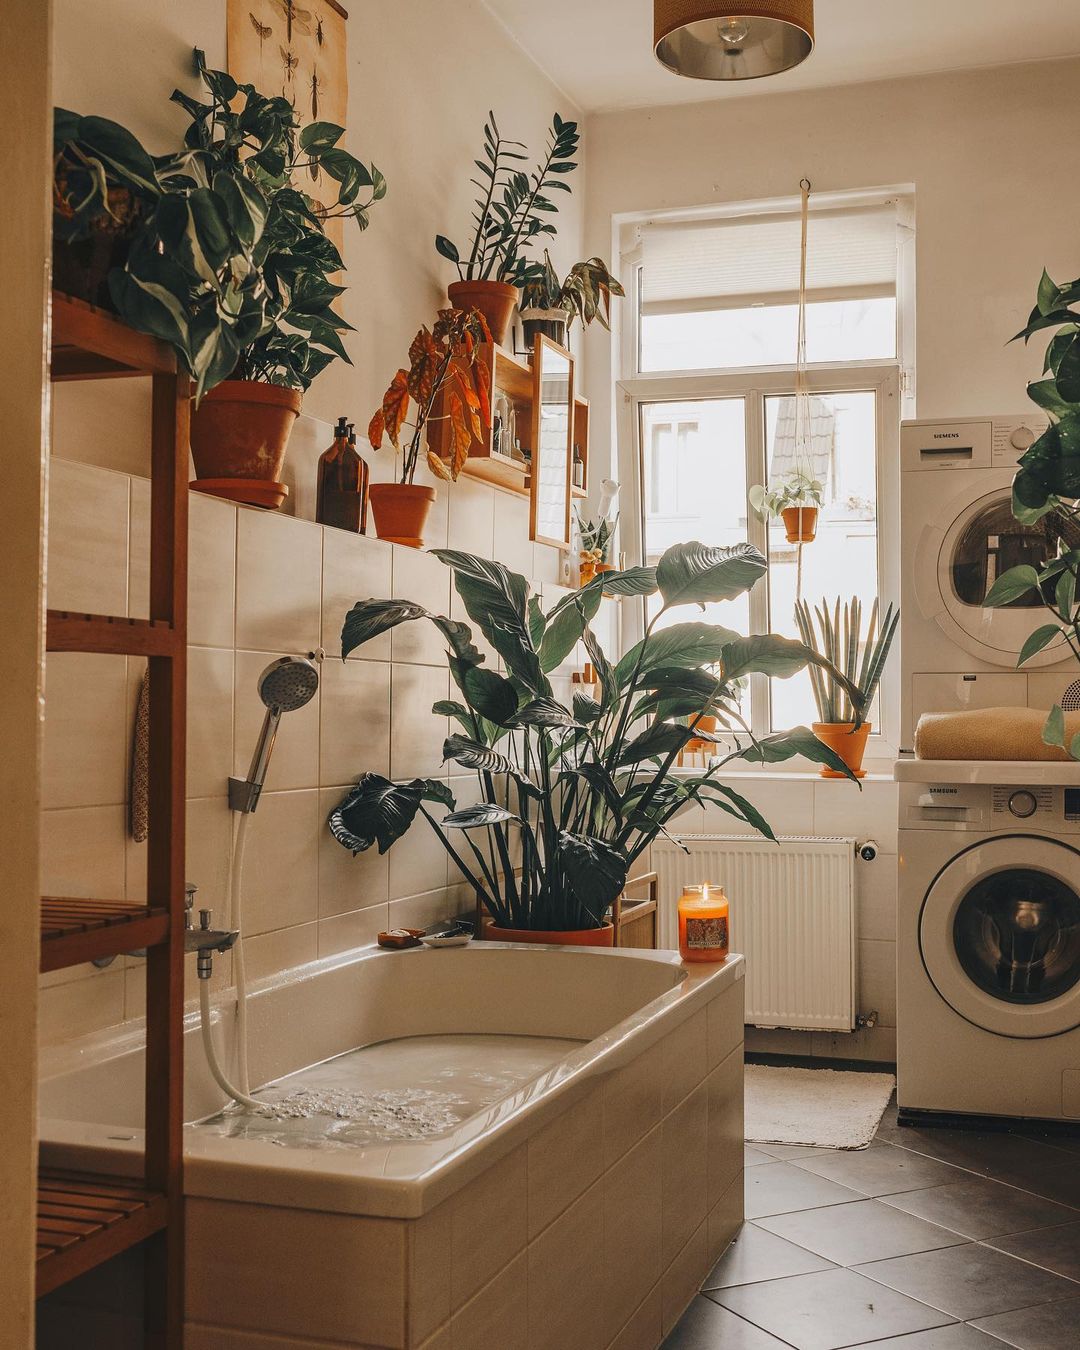 Plant Room Ideas: How To Turn Your Home Into a Leafy Paradise ...